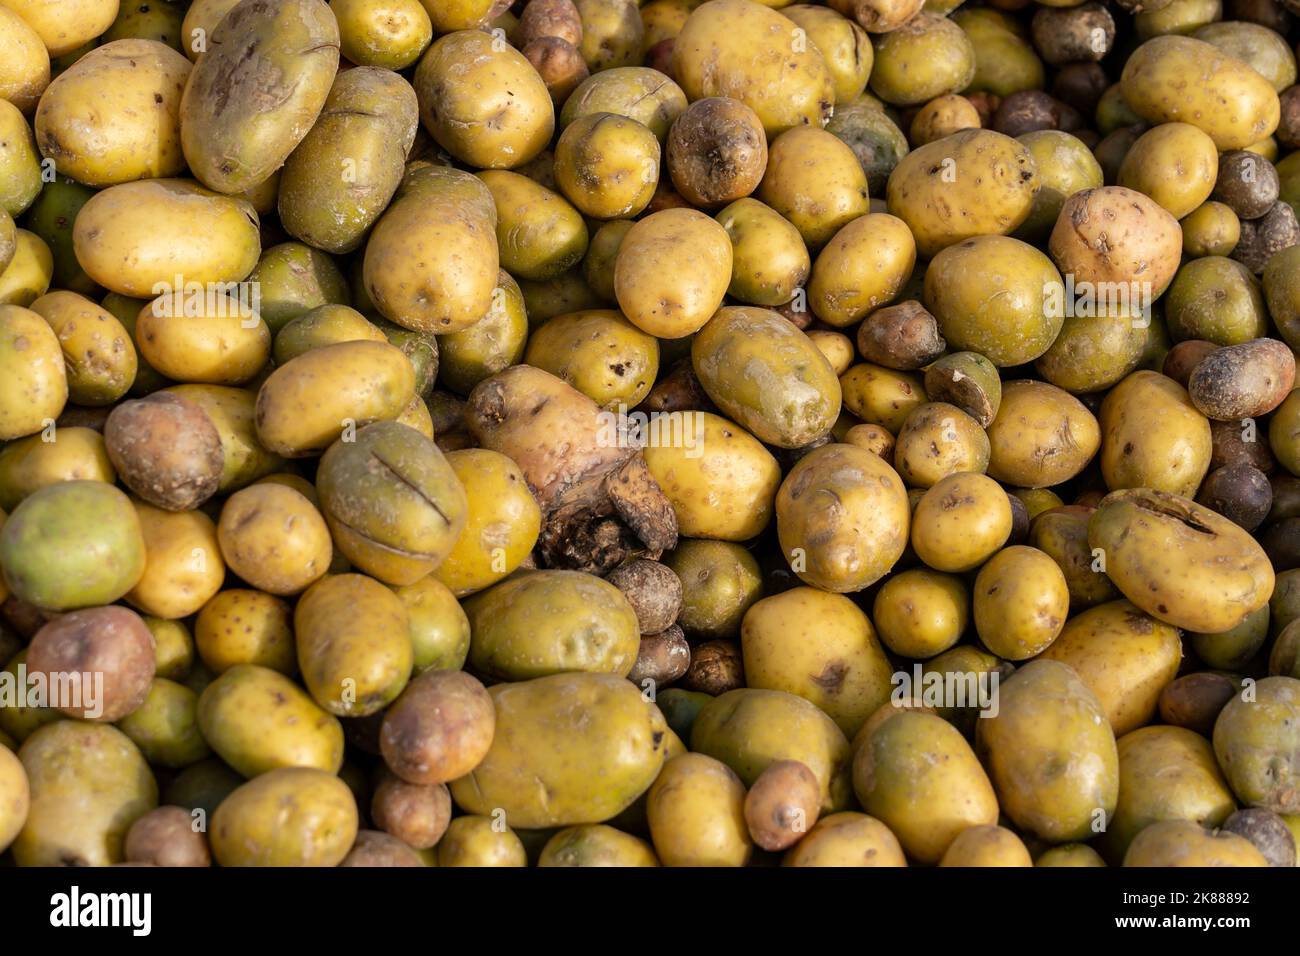 Pail of rotting potatoes in the sun. Stock Photo